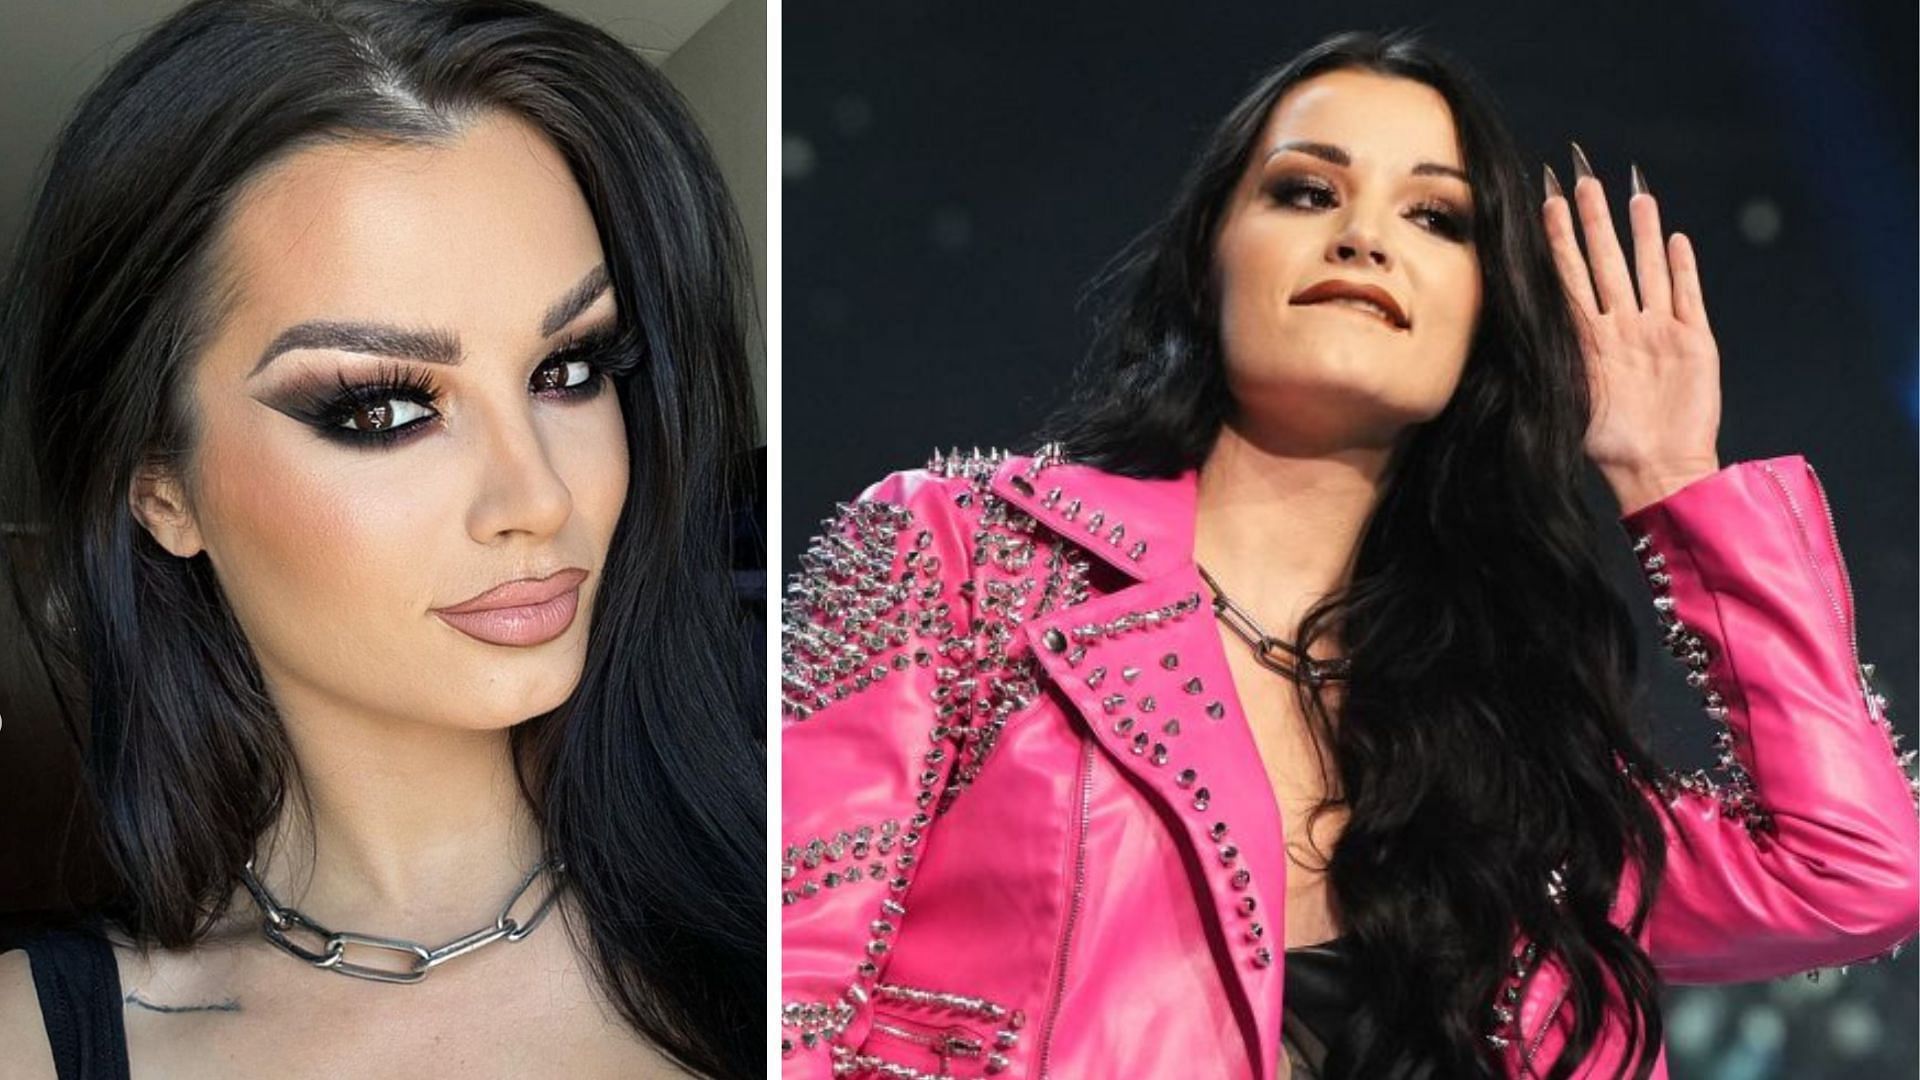 Saraya is part of The Outsiders faction in AEW.